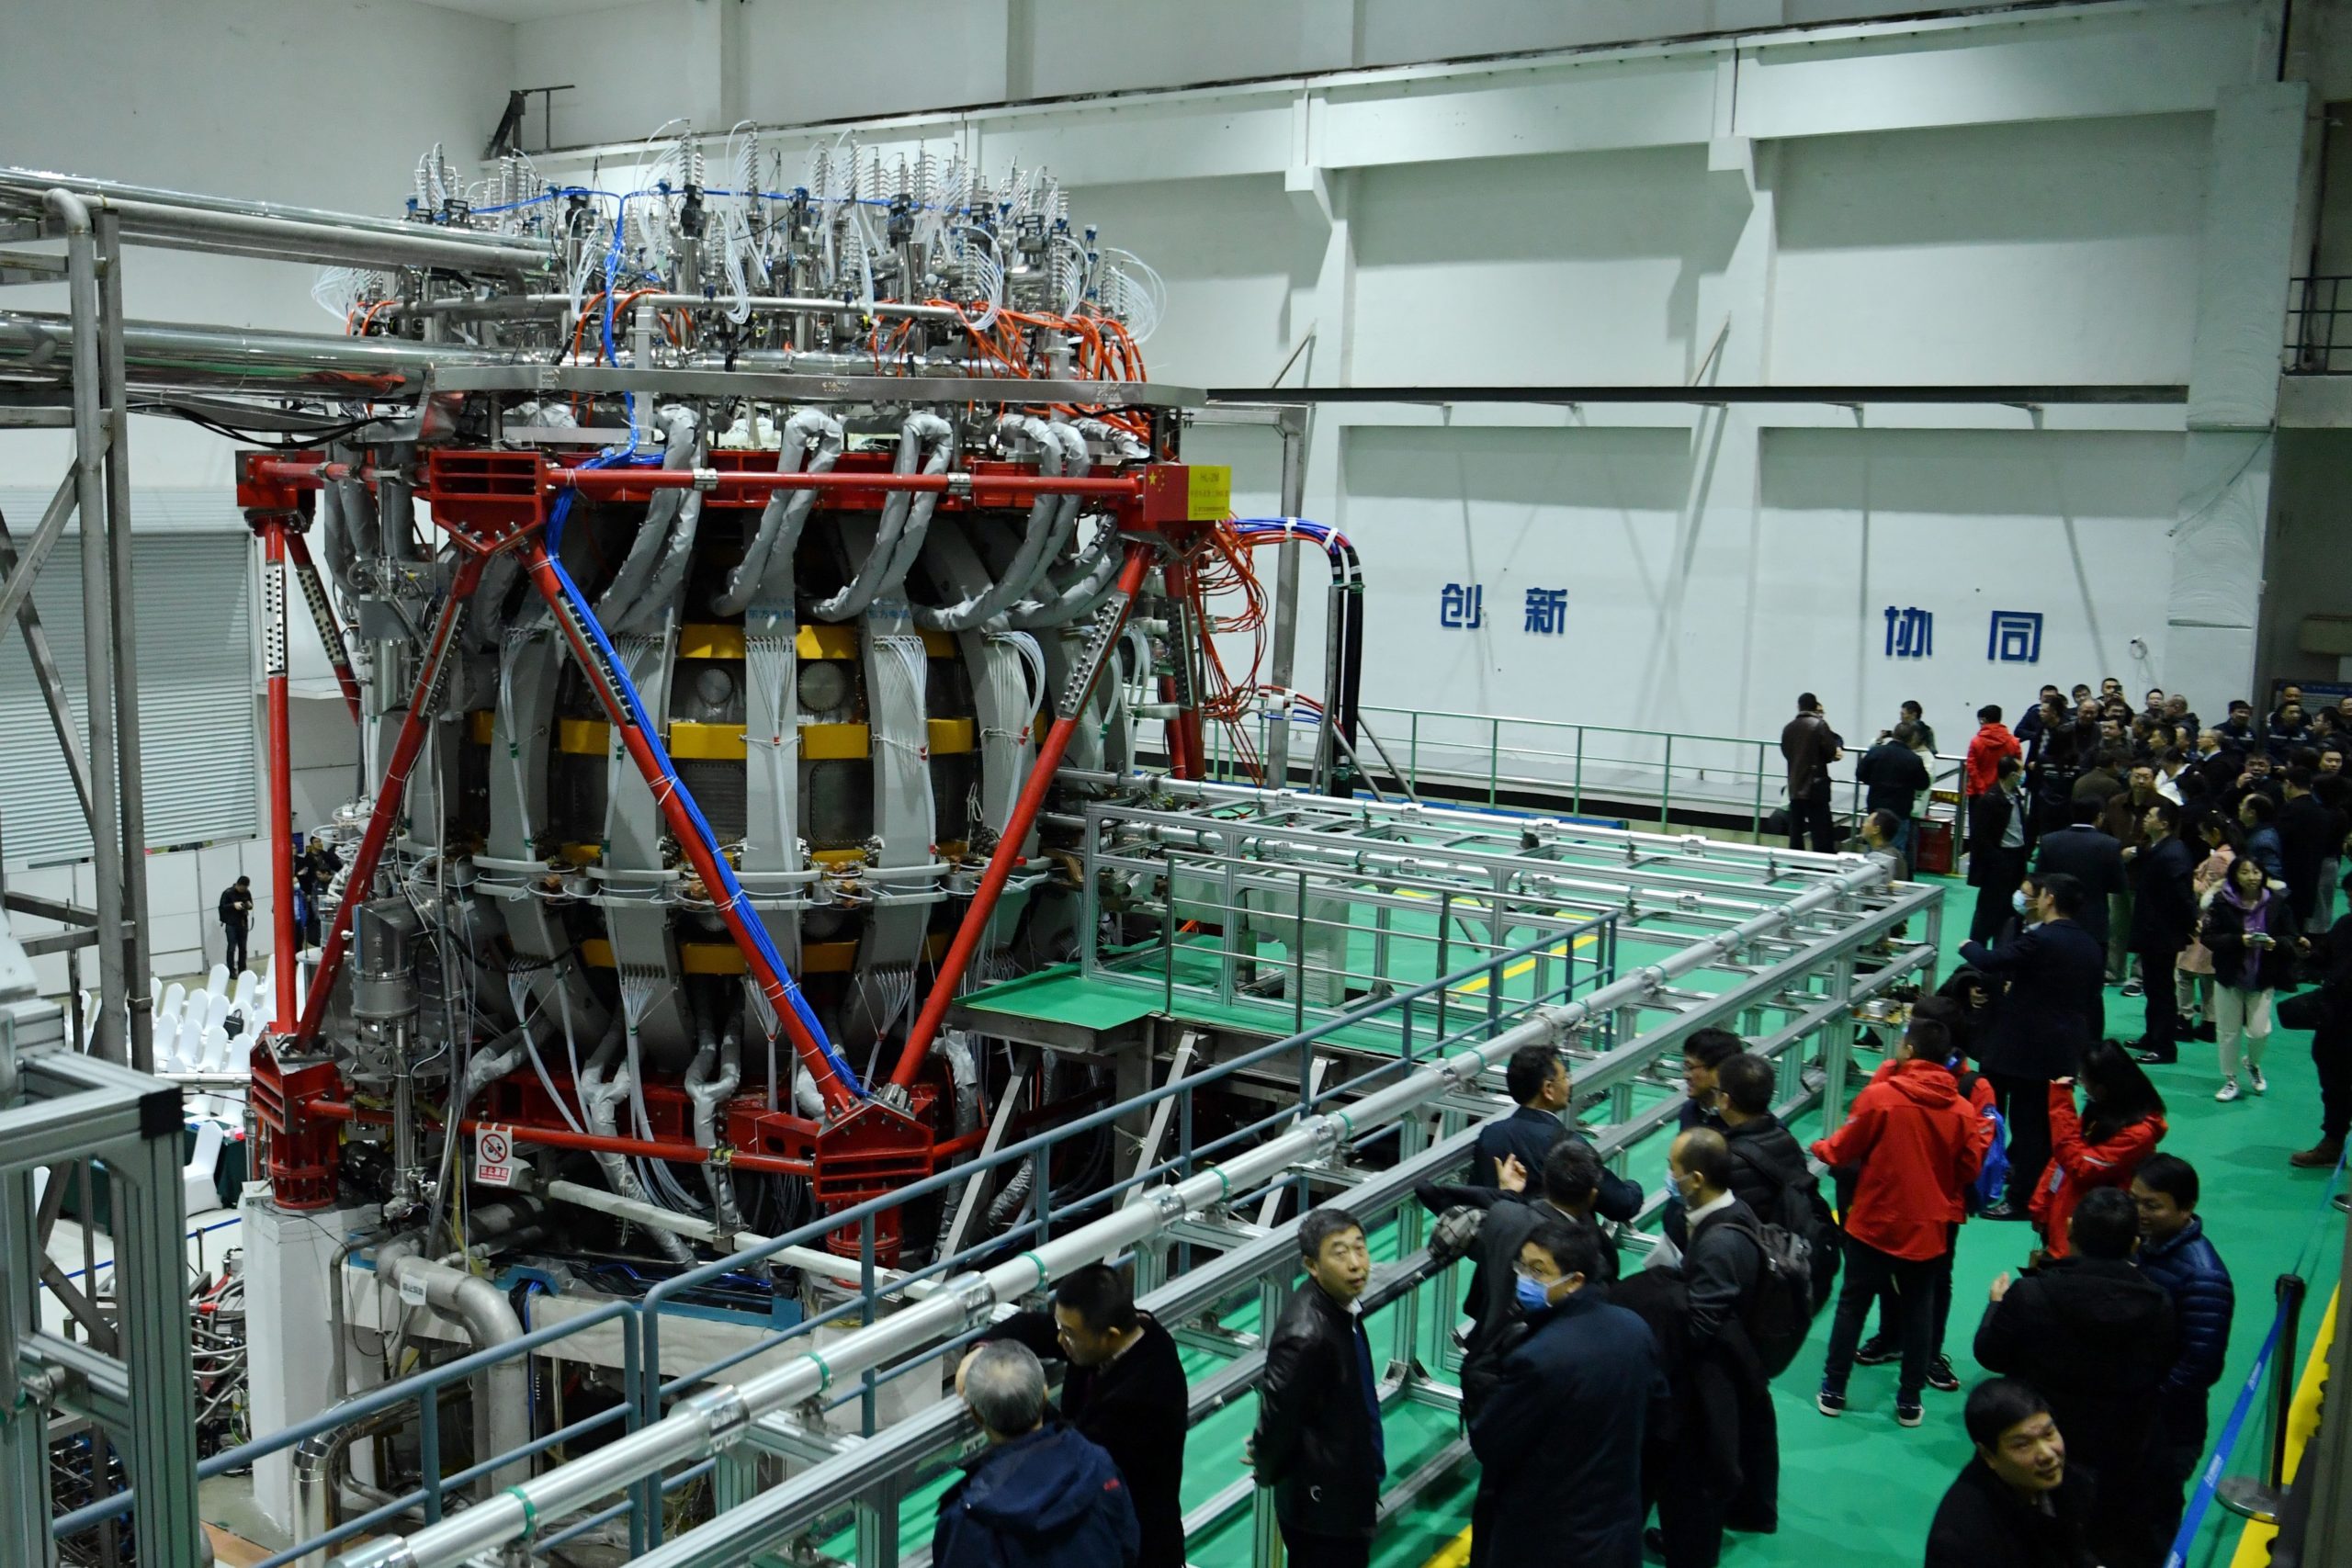 Chinas HL-2M nuclear fusion device, known as the new generation of "artificial sun," is displayed at a research laboratory in Chengdu, in eastern China's Sichuan province on Dec. 4, 2020. (STR/AFP via Getty Images)